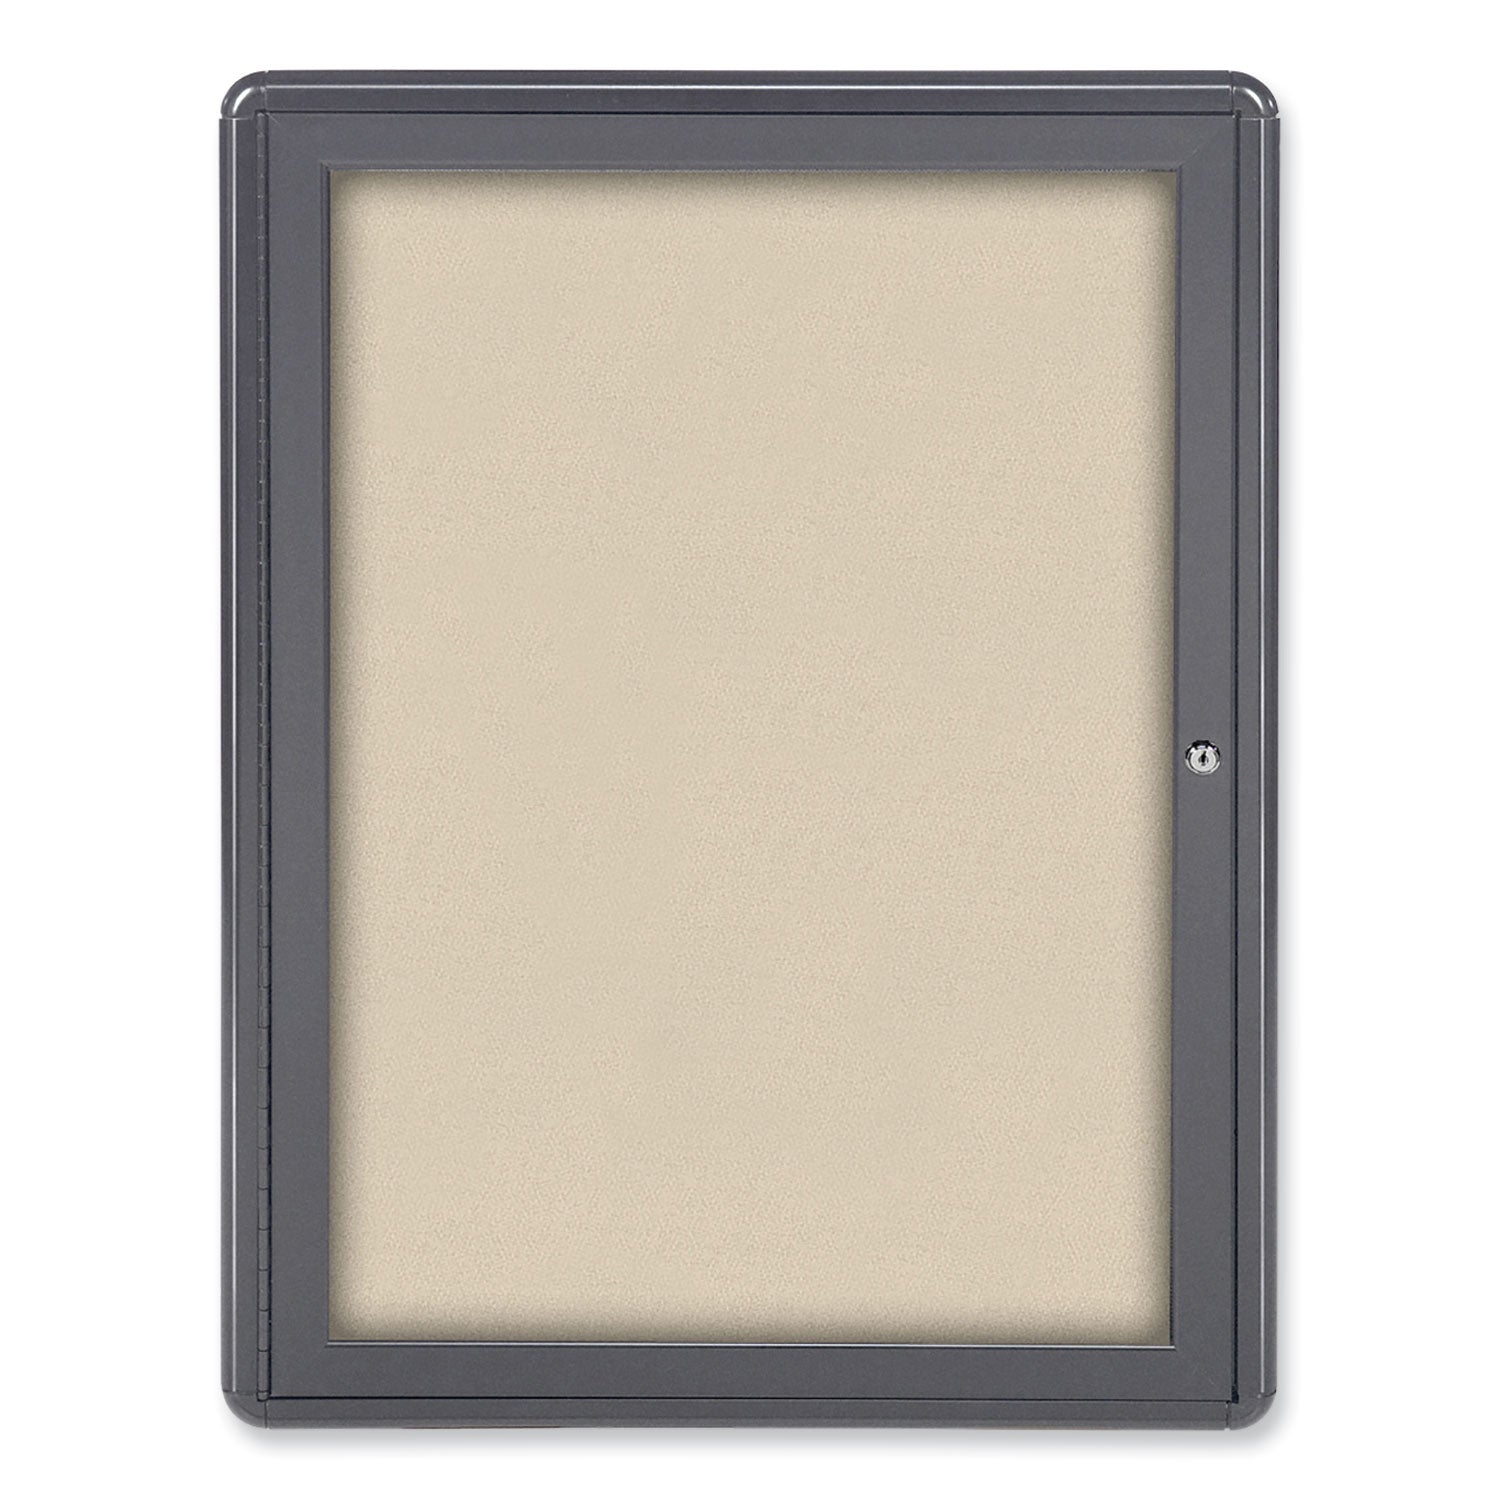 ovation-1-door-enclosed-beige-fabric-bulletin-board-w-gray-frame-2413x3375-aluminum-frame-ships-in-7-10-business-days_gheovg1f90 - 1